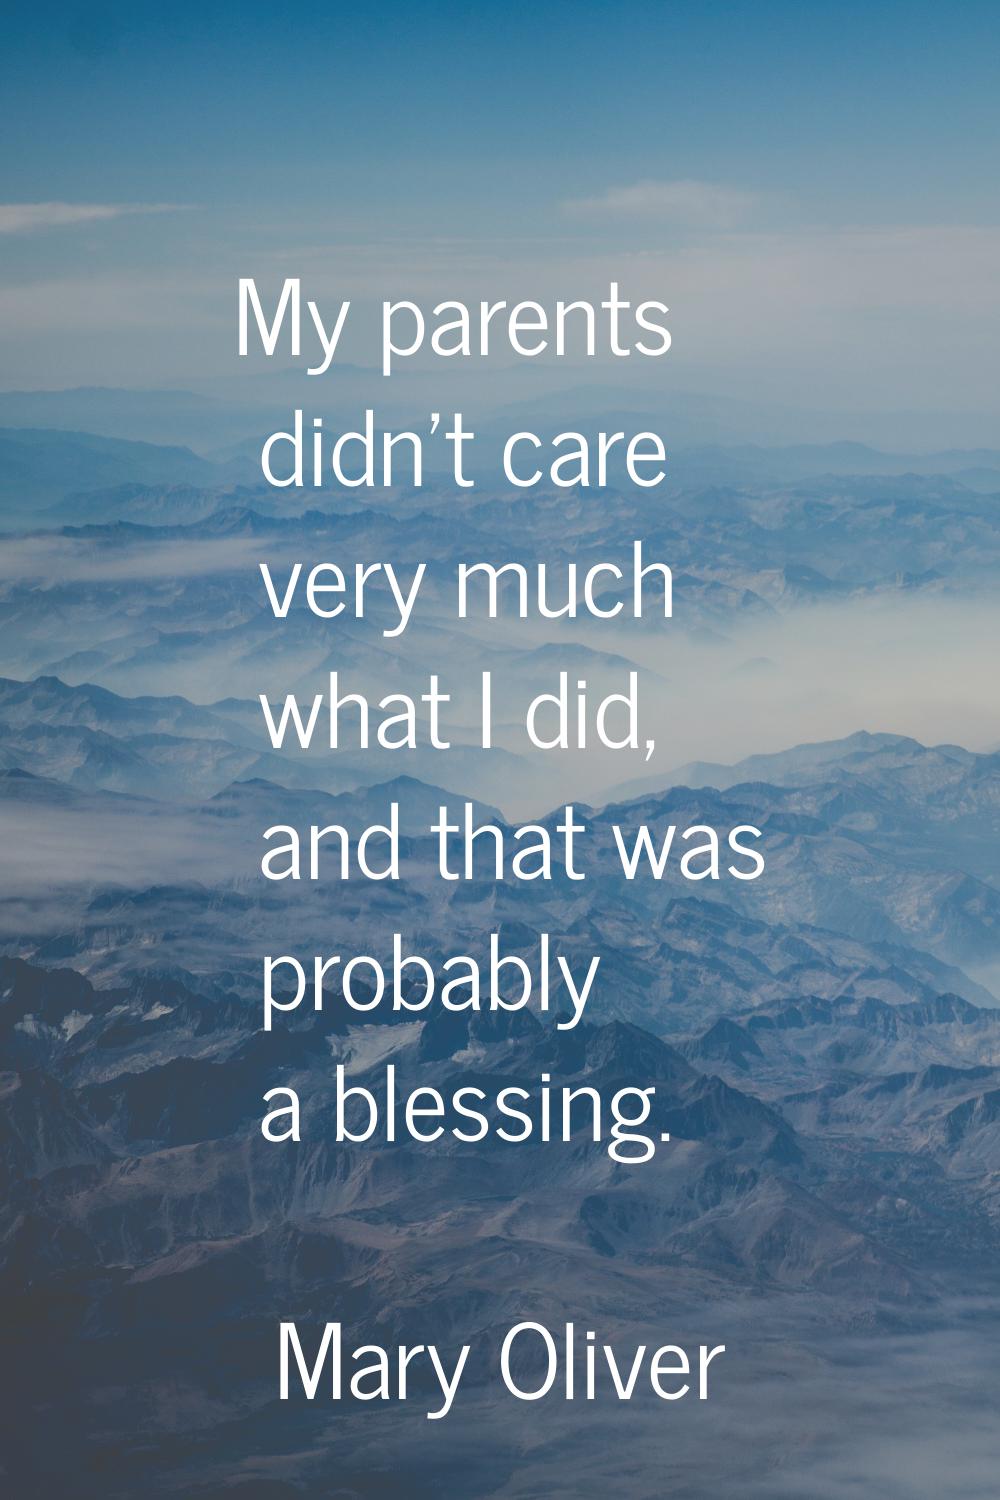 My parents didn't care very much what I did, and that was probably a blessing.